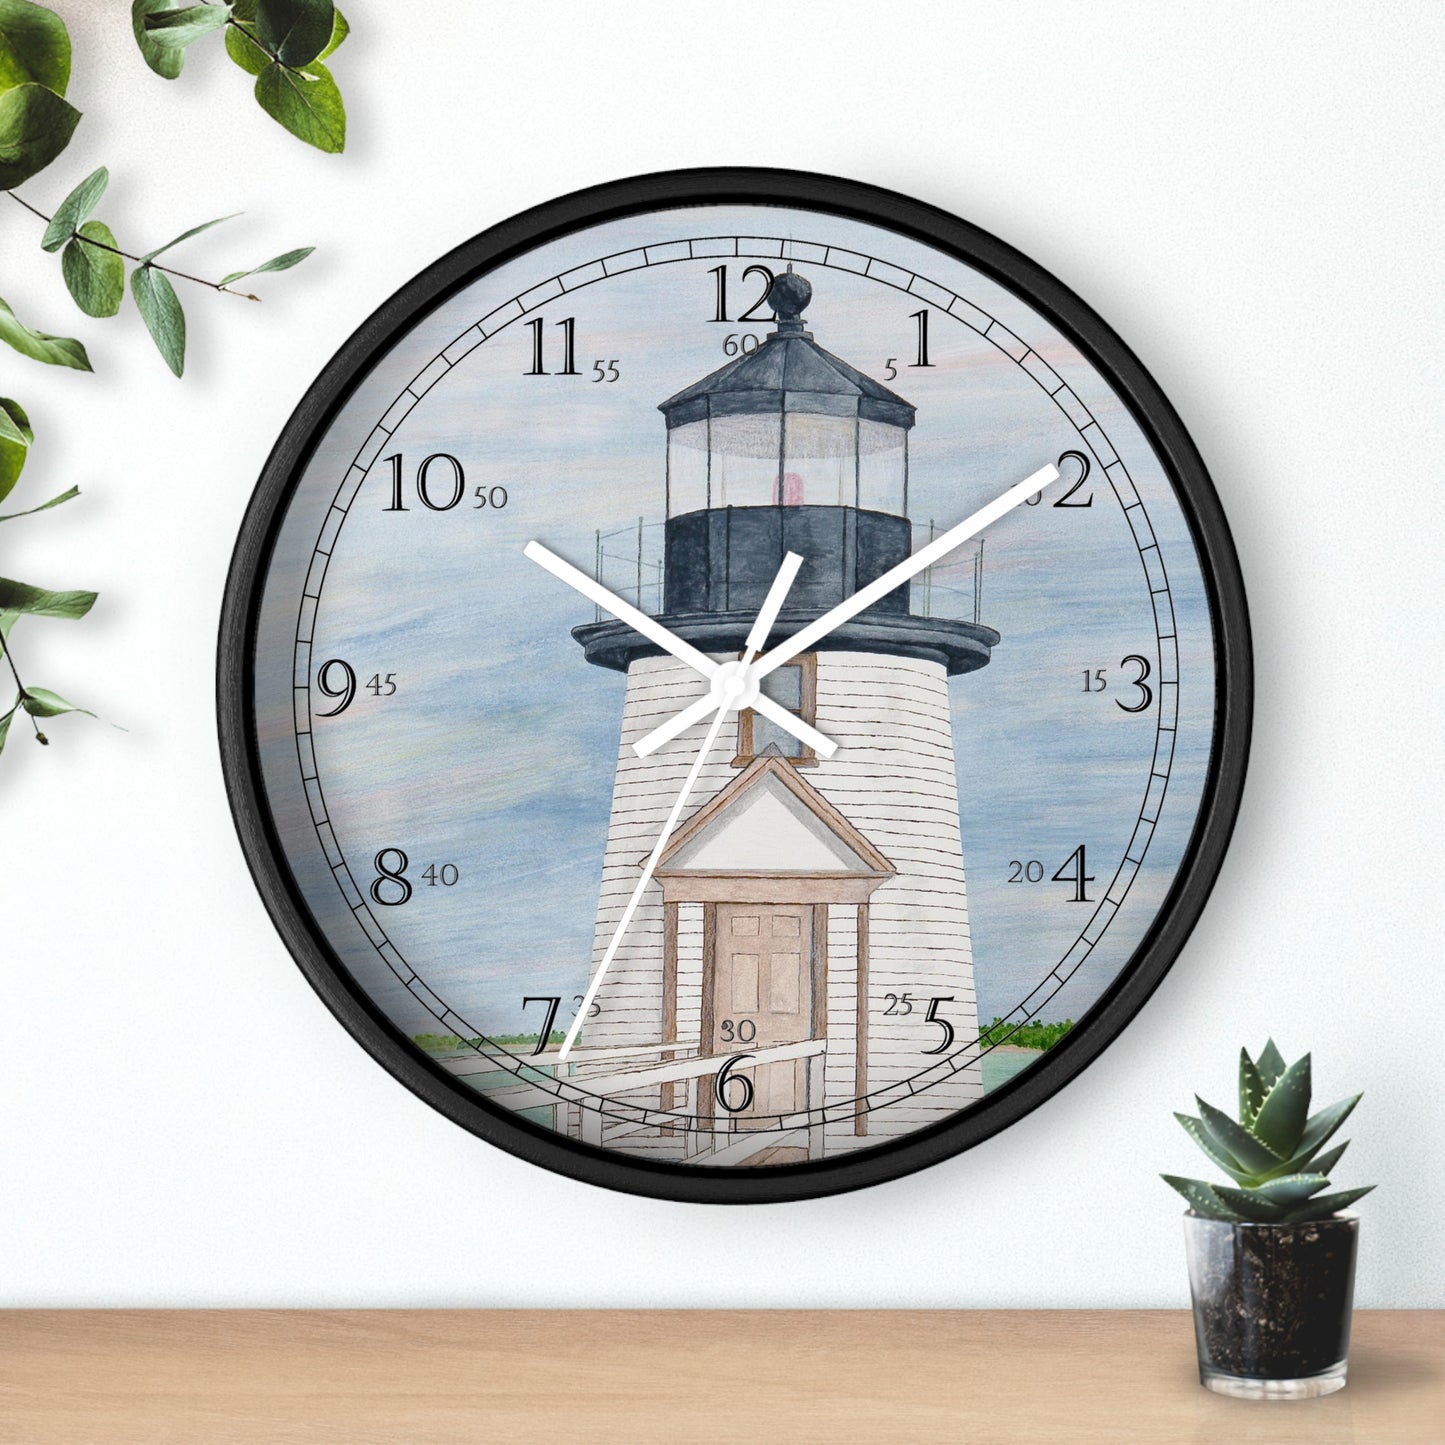 Evening Light At Brant Point English Numeral Clock